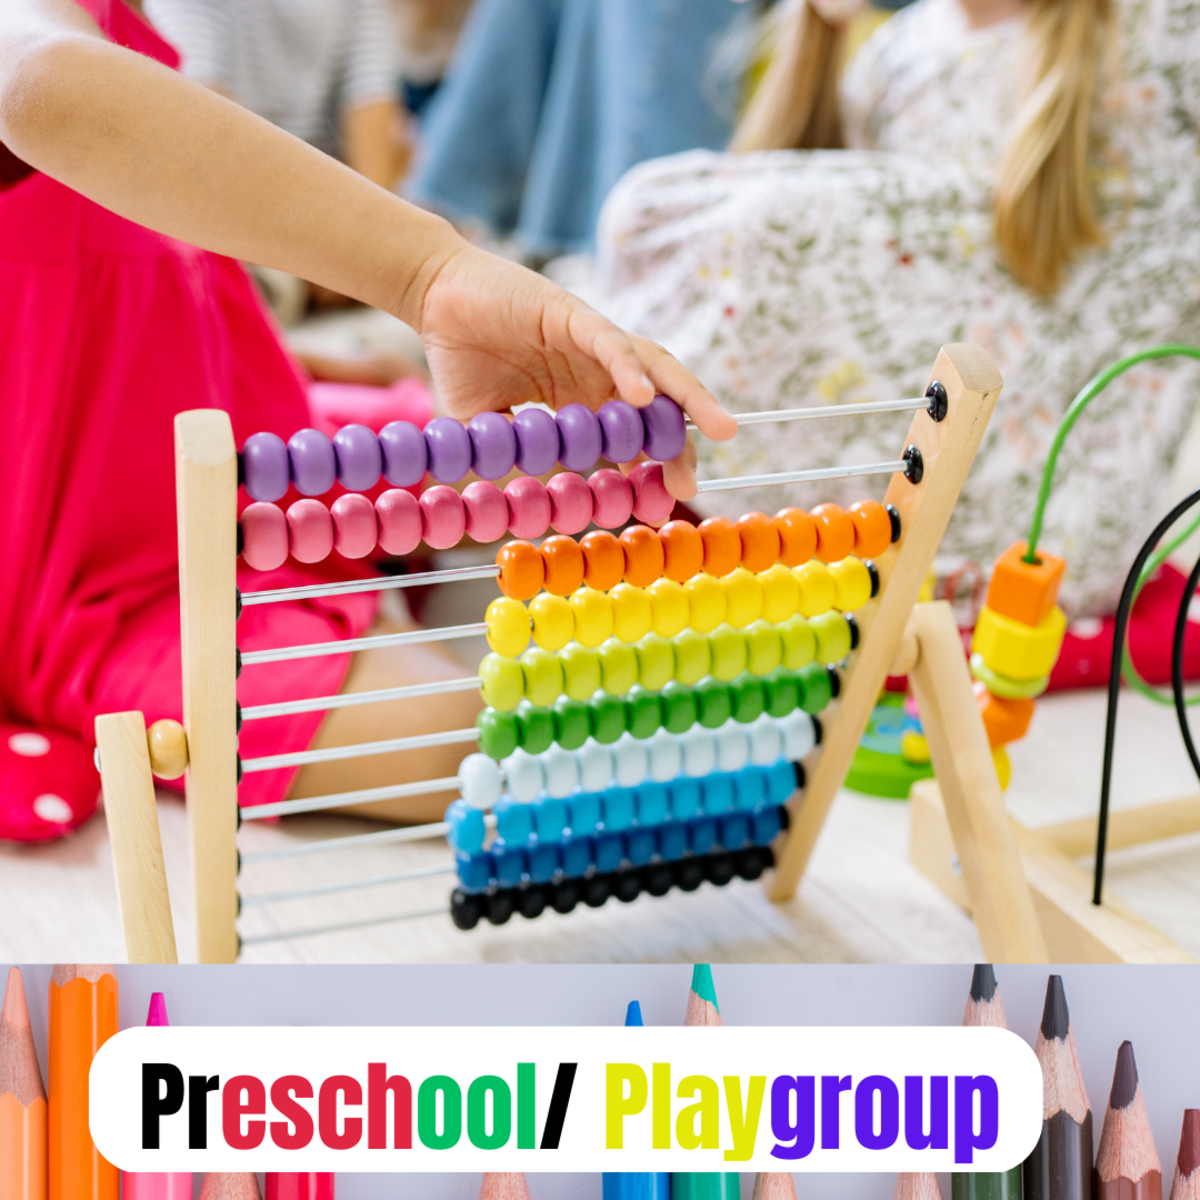 What is a Preschool? Why is it important for your child?